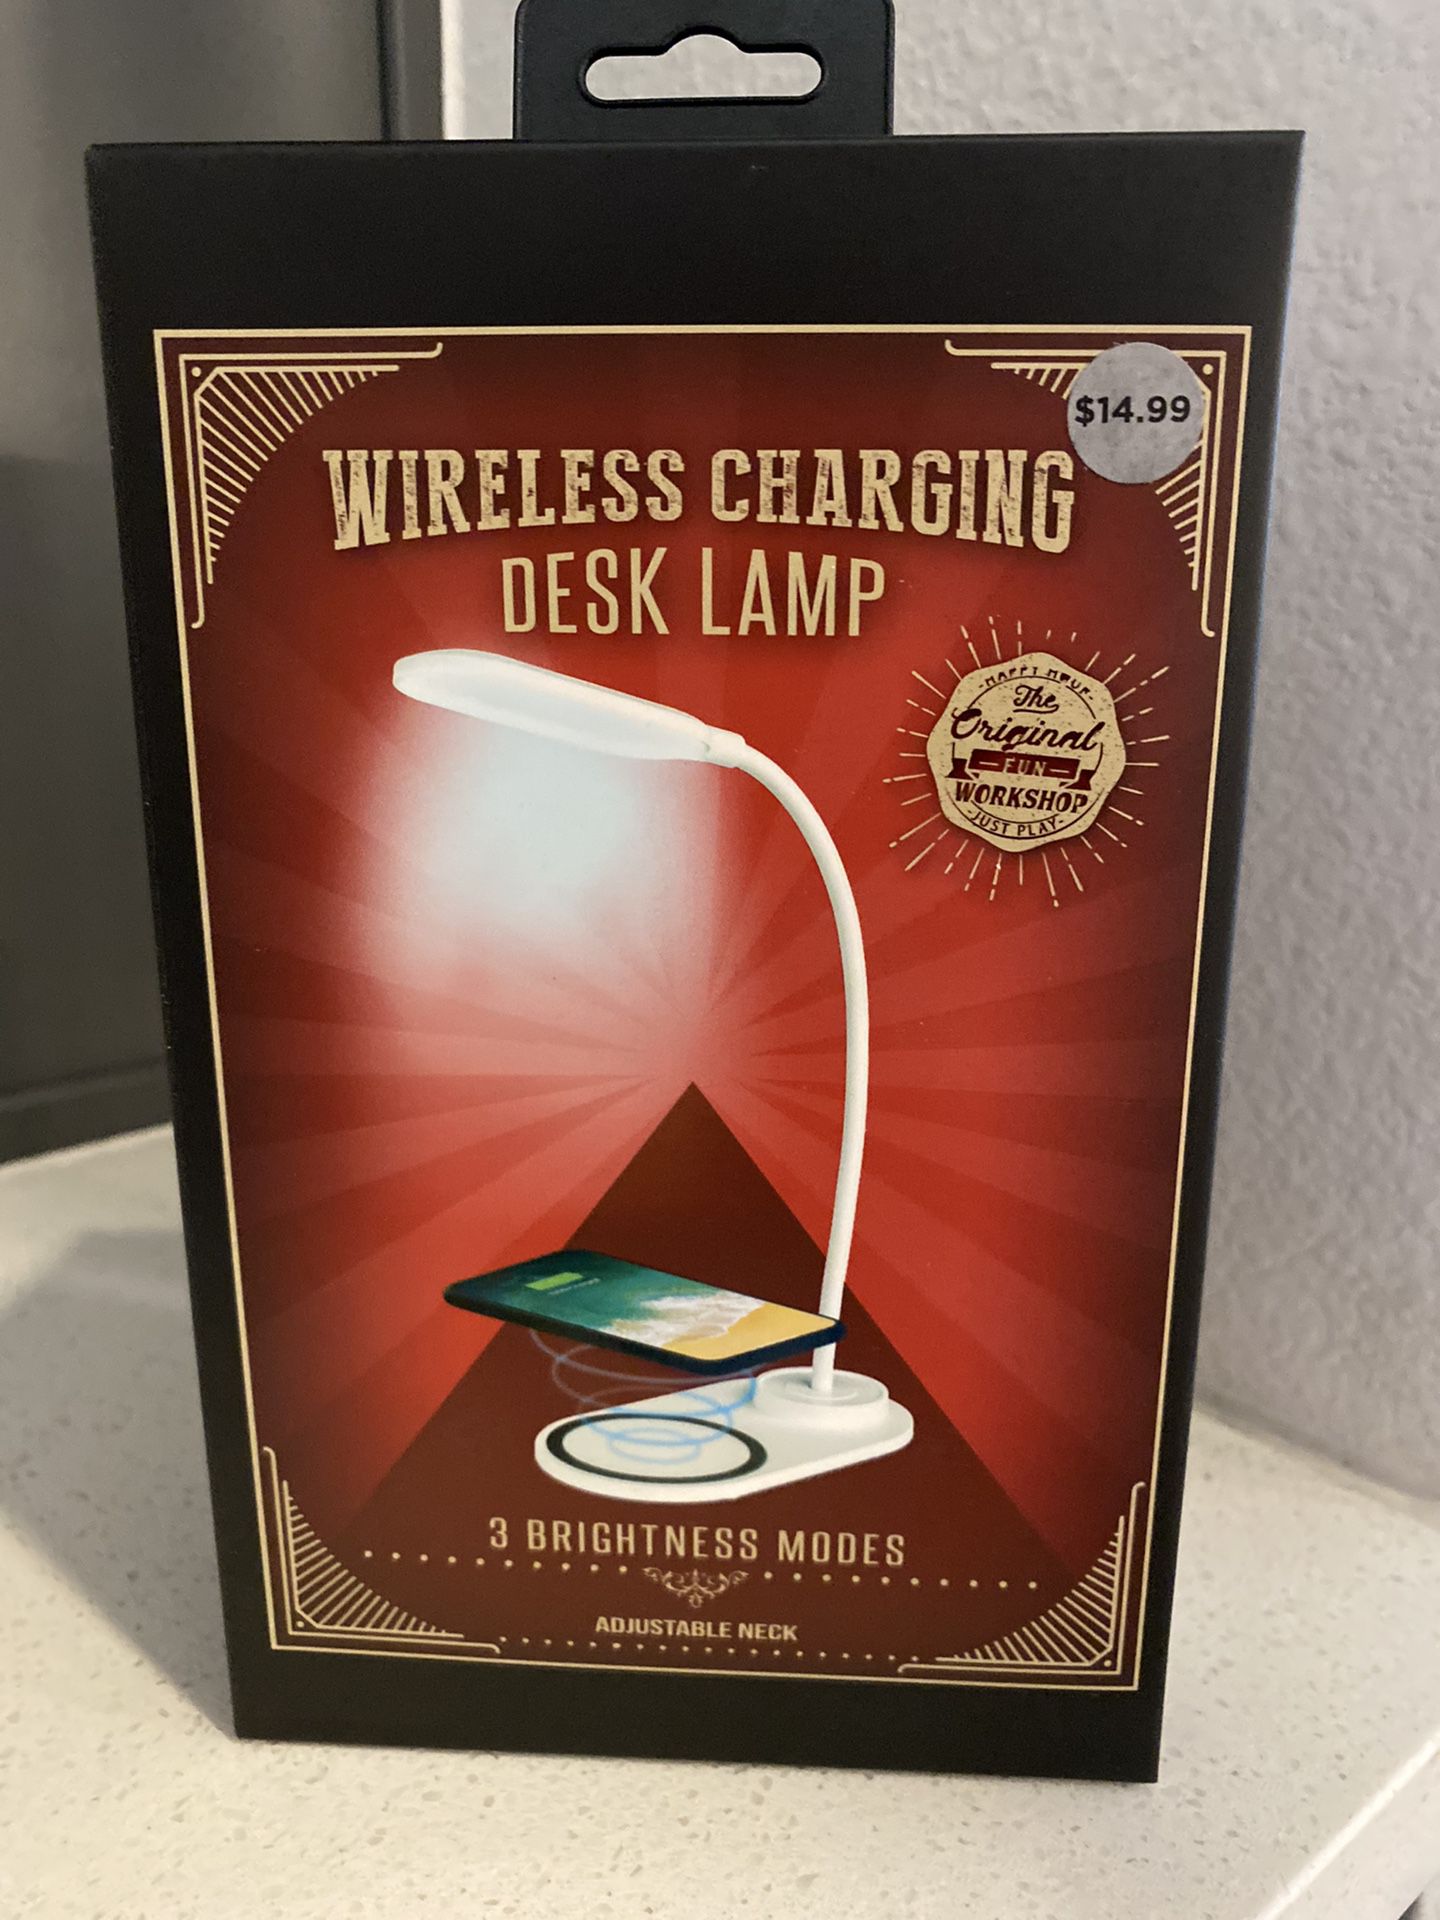 Wireless Charging Desk lamp - With Adjustable Neck & 3 Brightness Modes